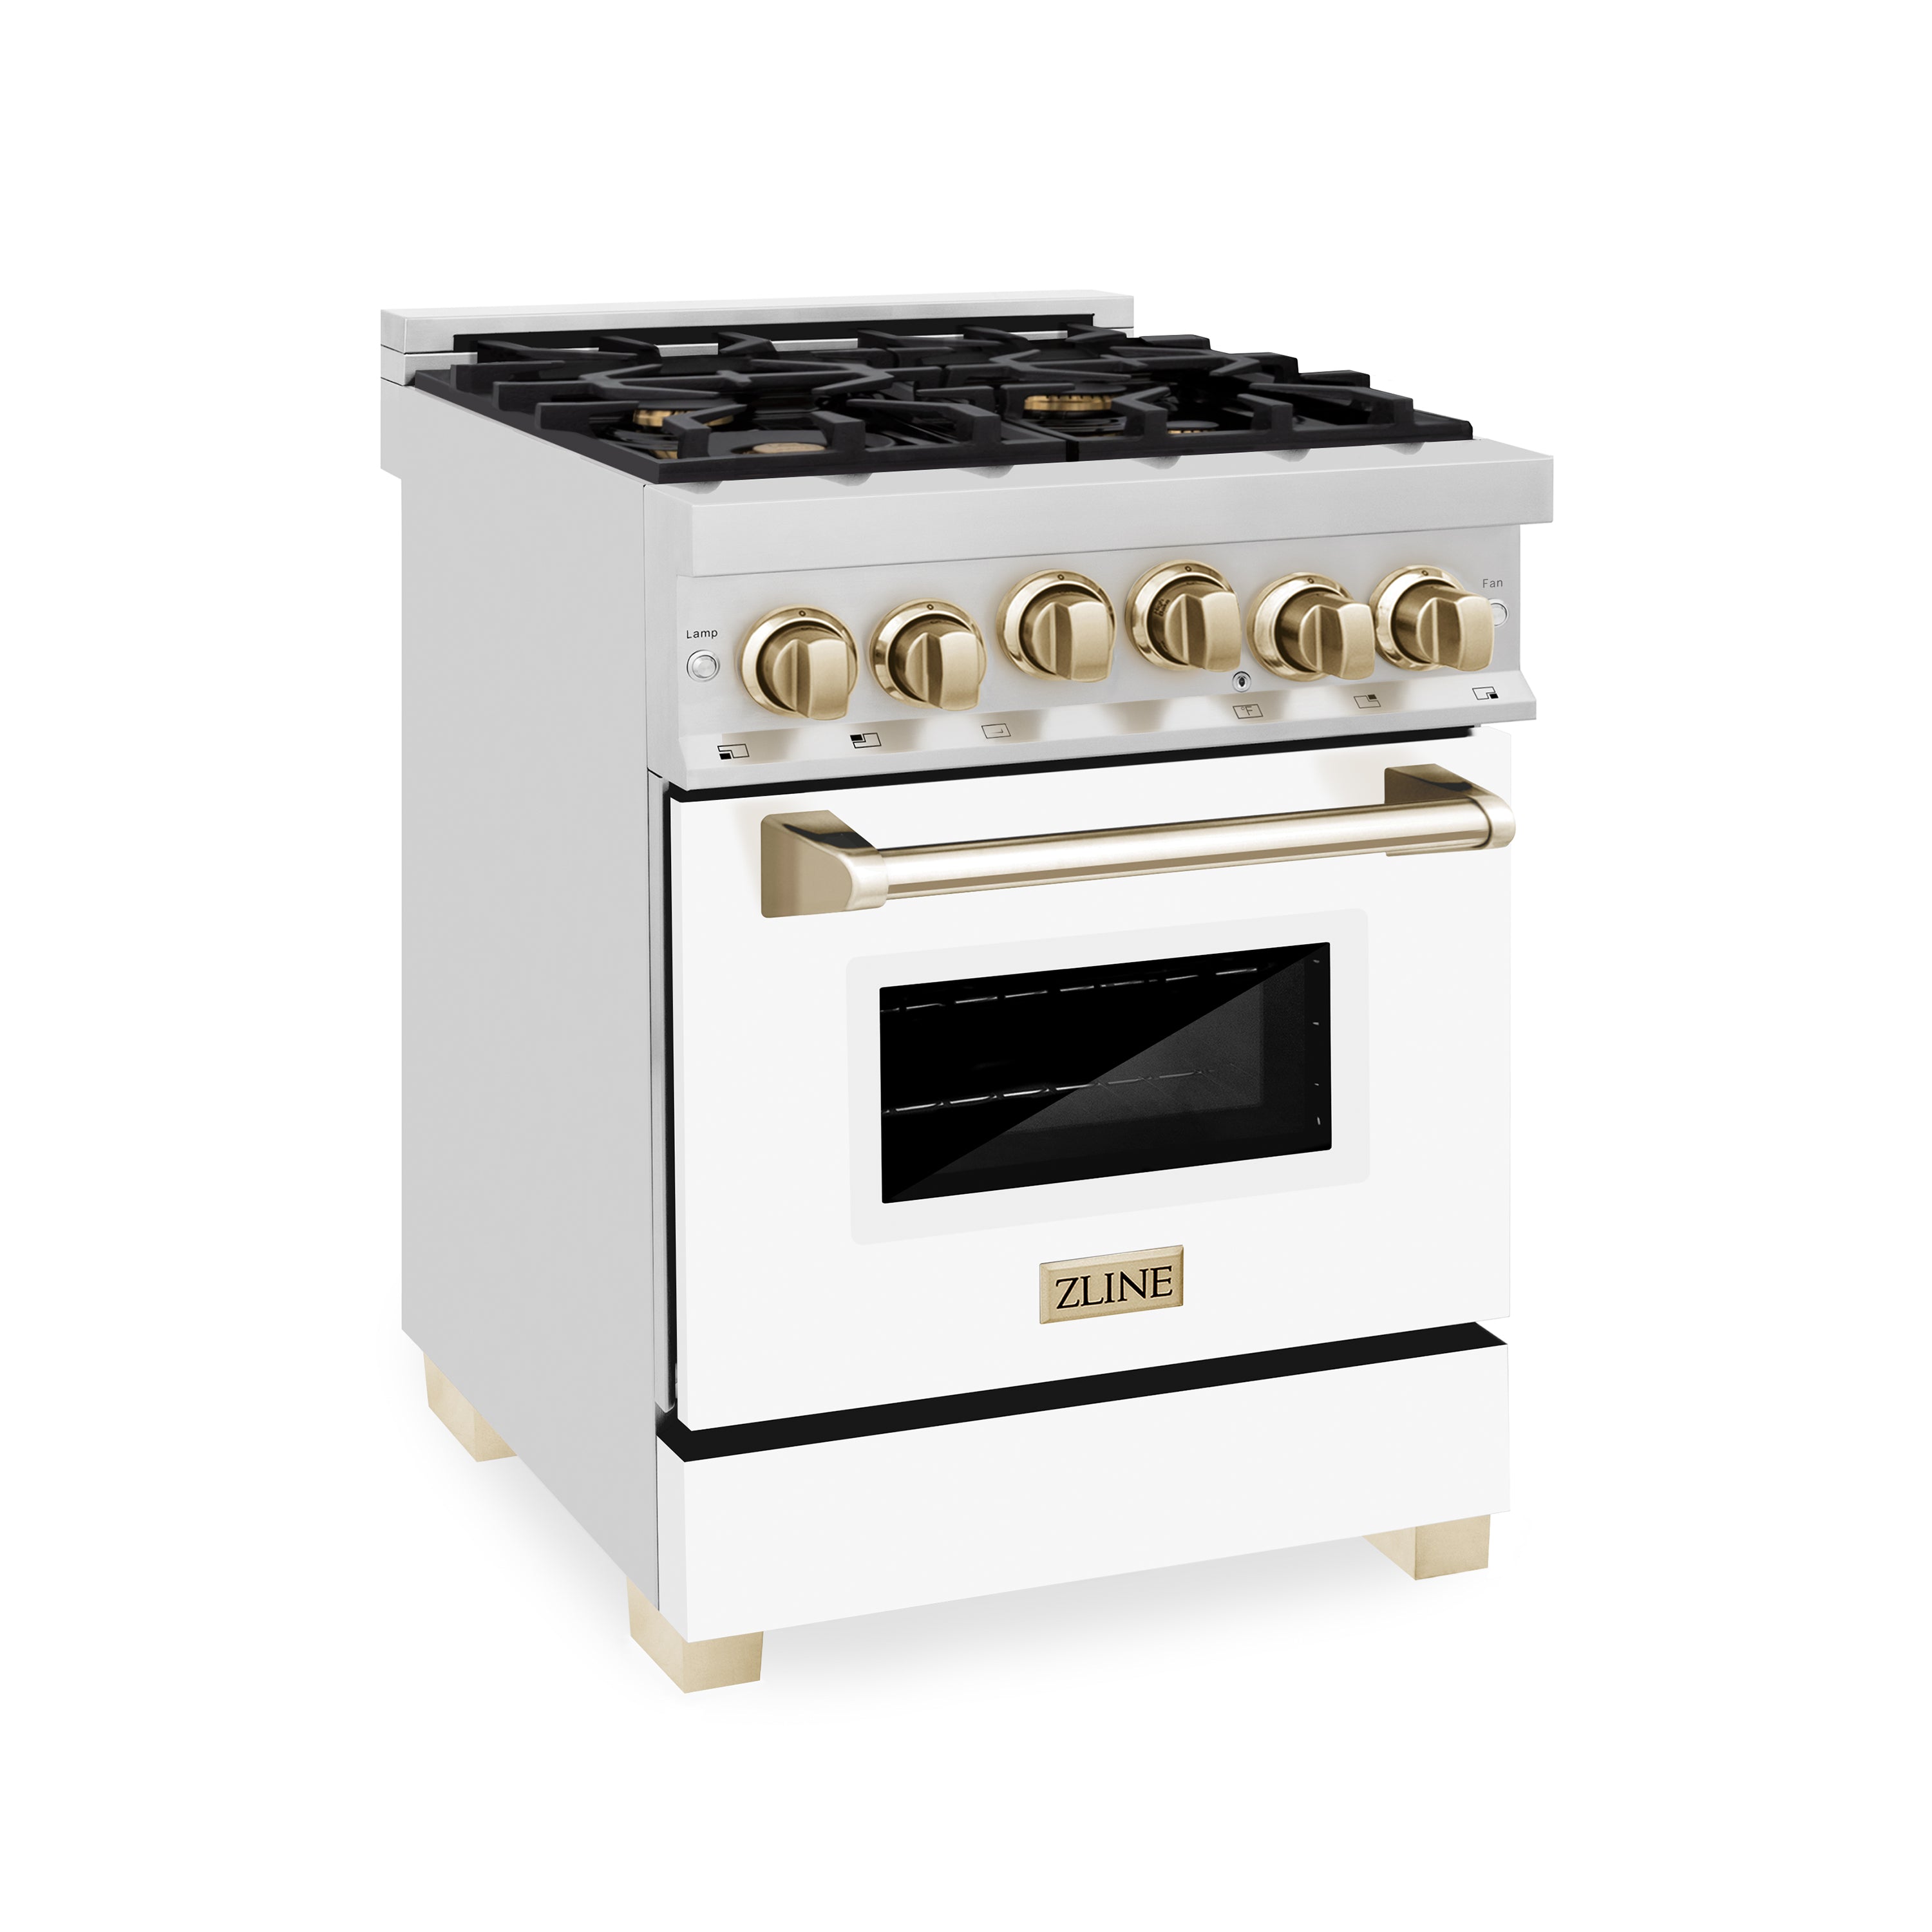 ZLINE Autograph Edition 24" 2.8 cu. ft. Range with Gas Stove and Gas Oven in Stainless Steel with White Matte Door and Gold Accents (RGZ-WM-24-G)